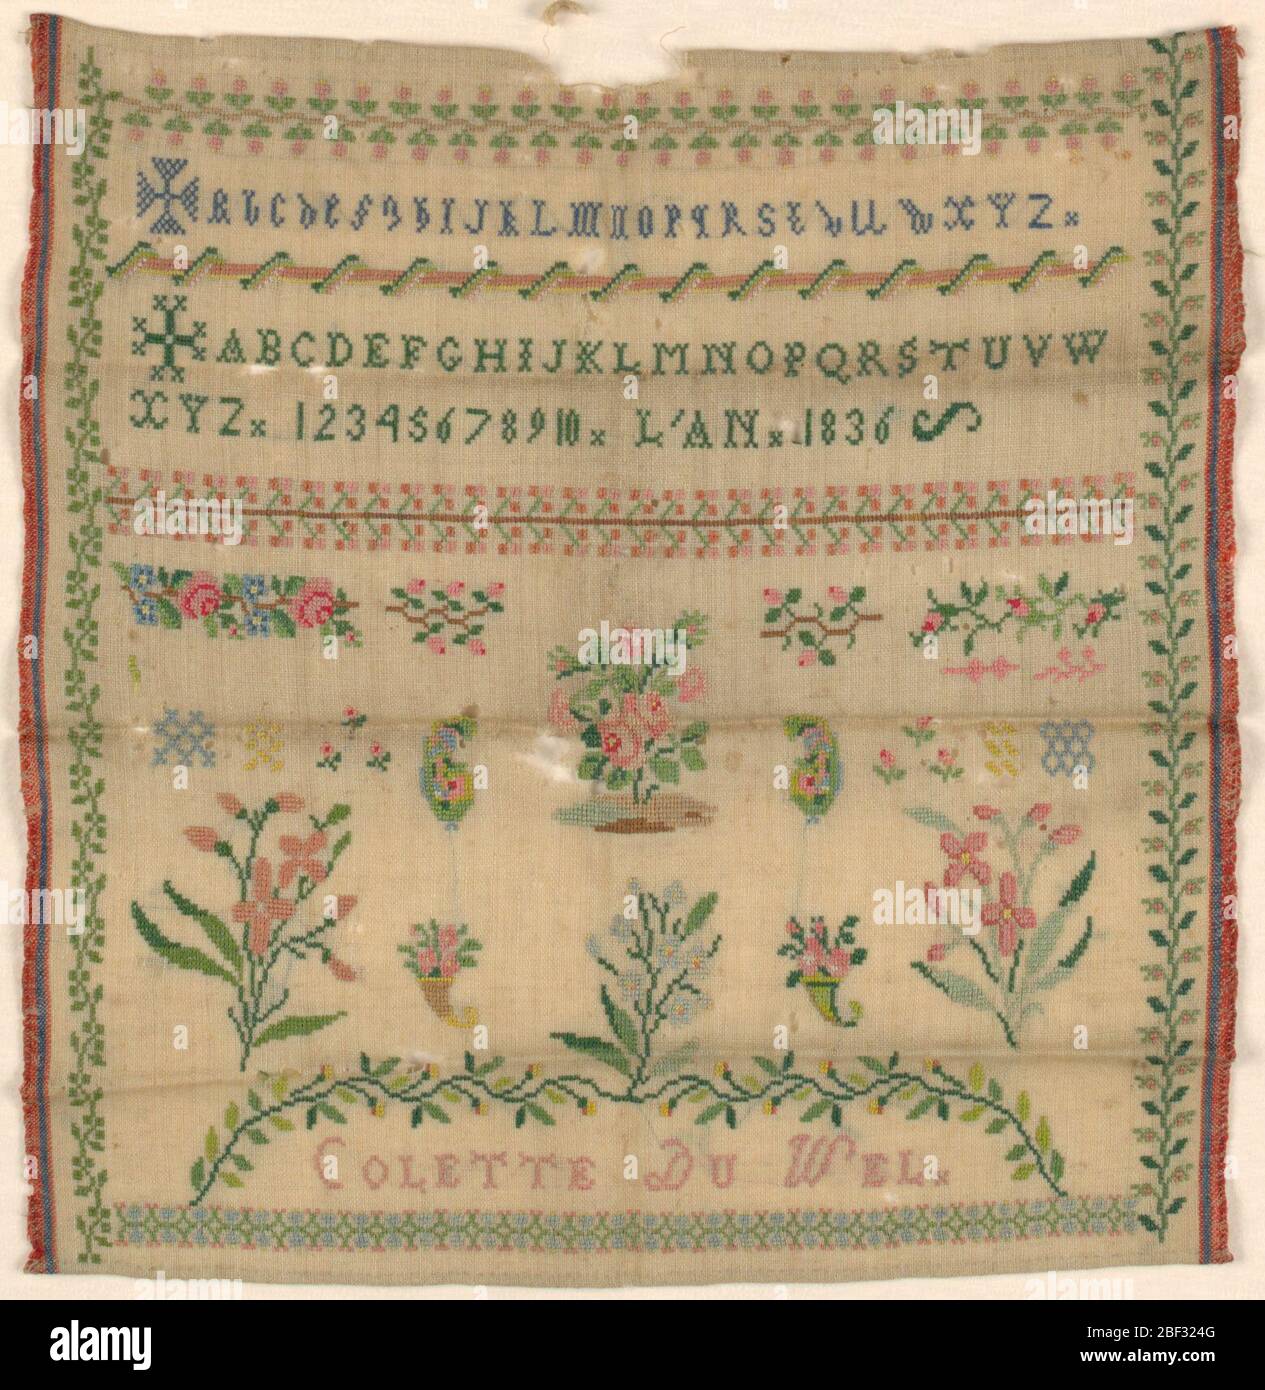 Sampler. Upper third has two alphabets introduced by Maltese crosses and inscription, lower third has isolated floral motifs. Floral borders on four sides. Stock Photo